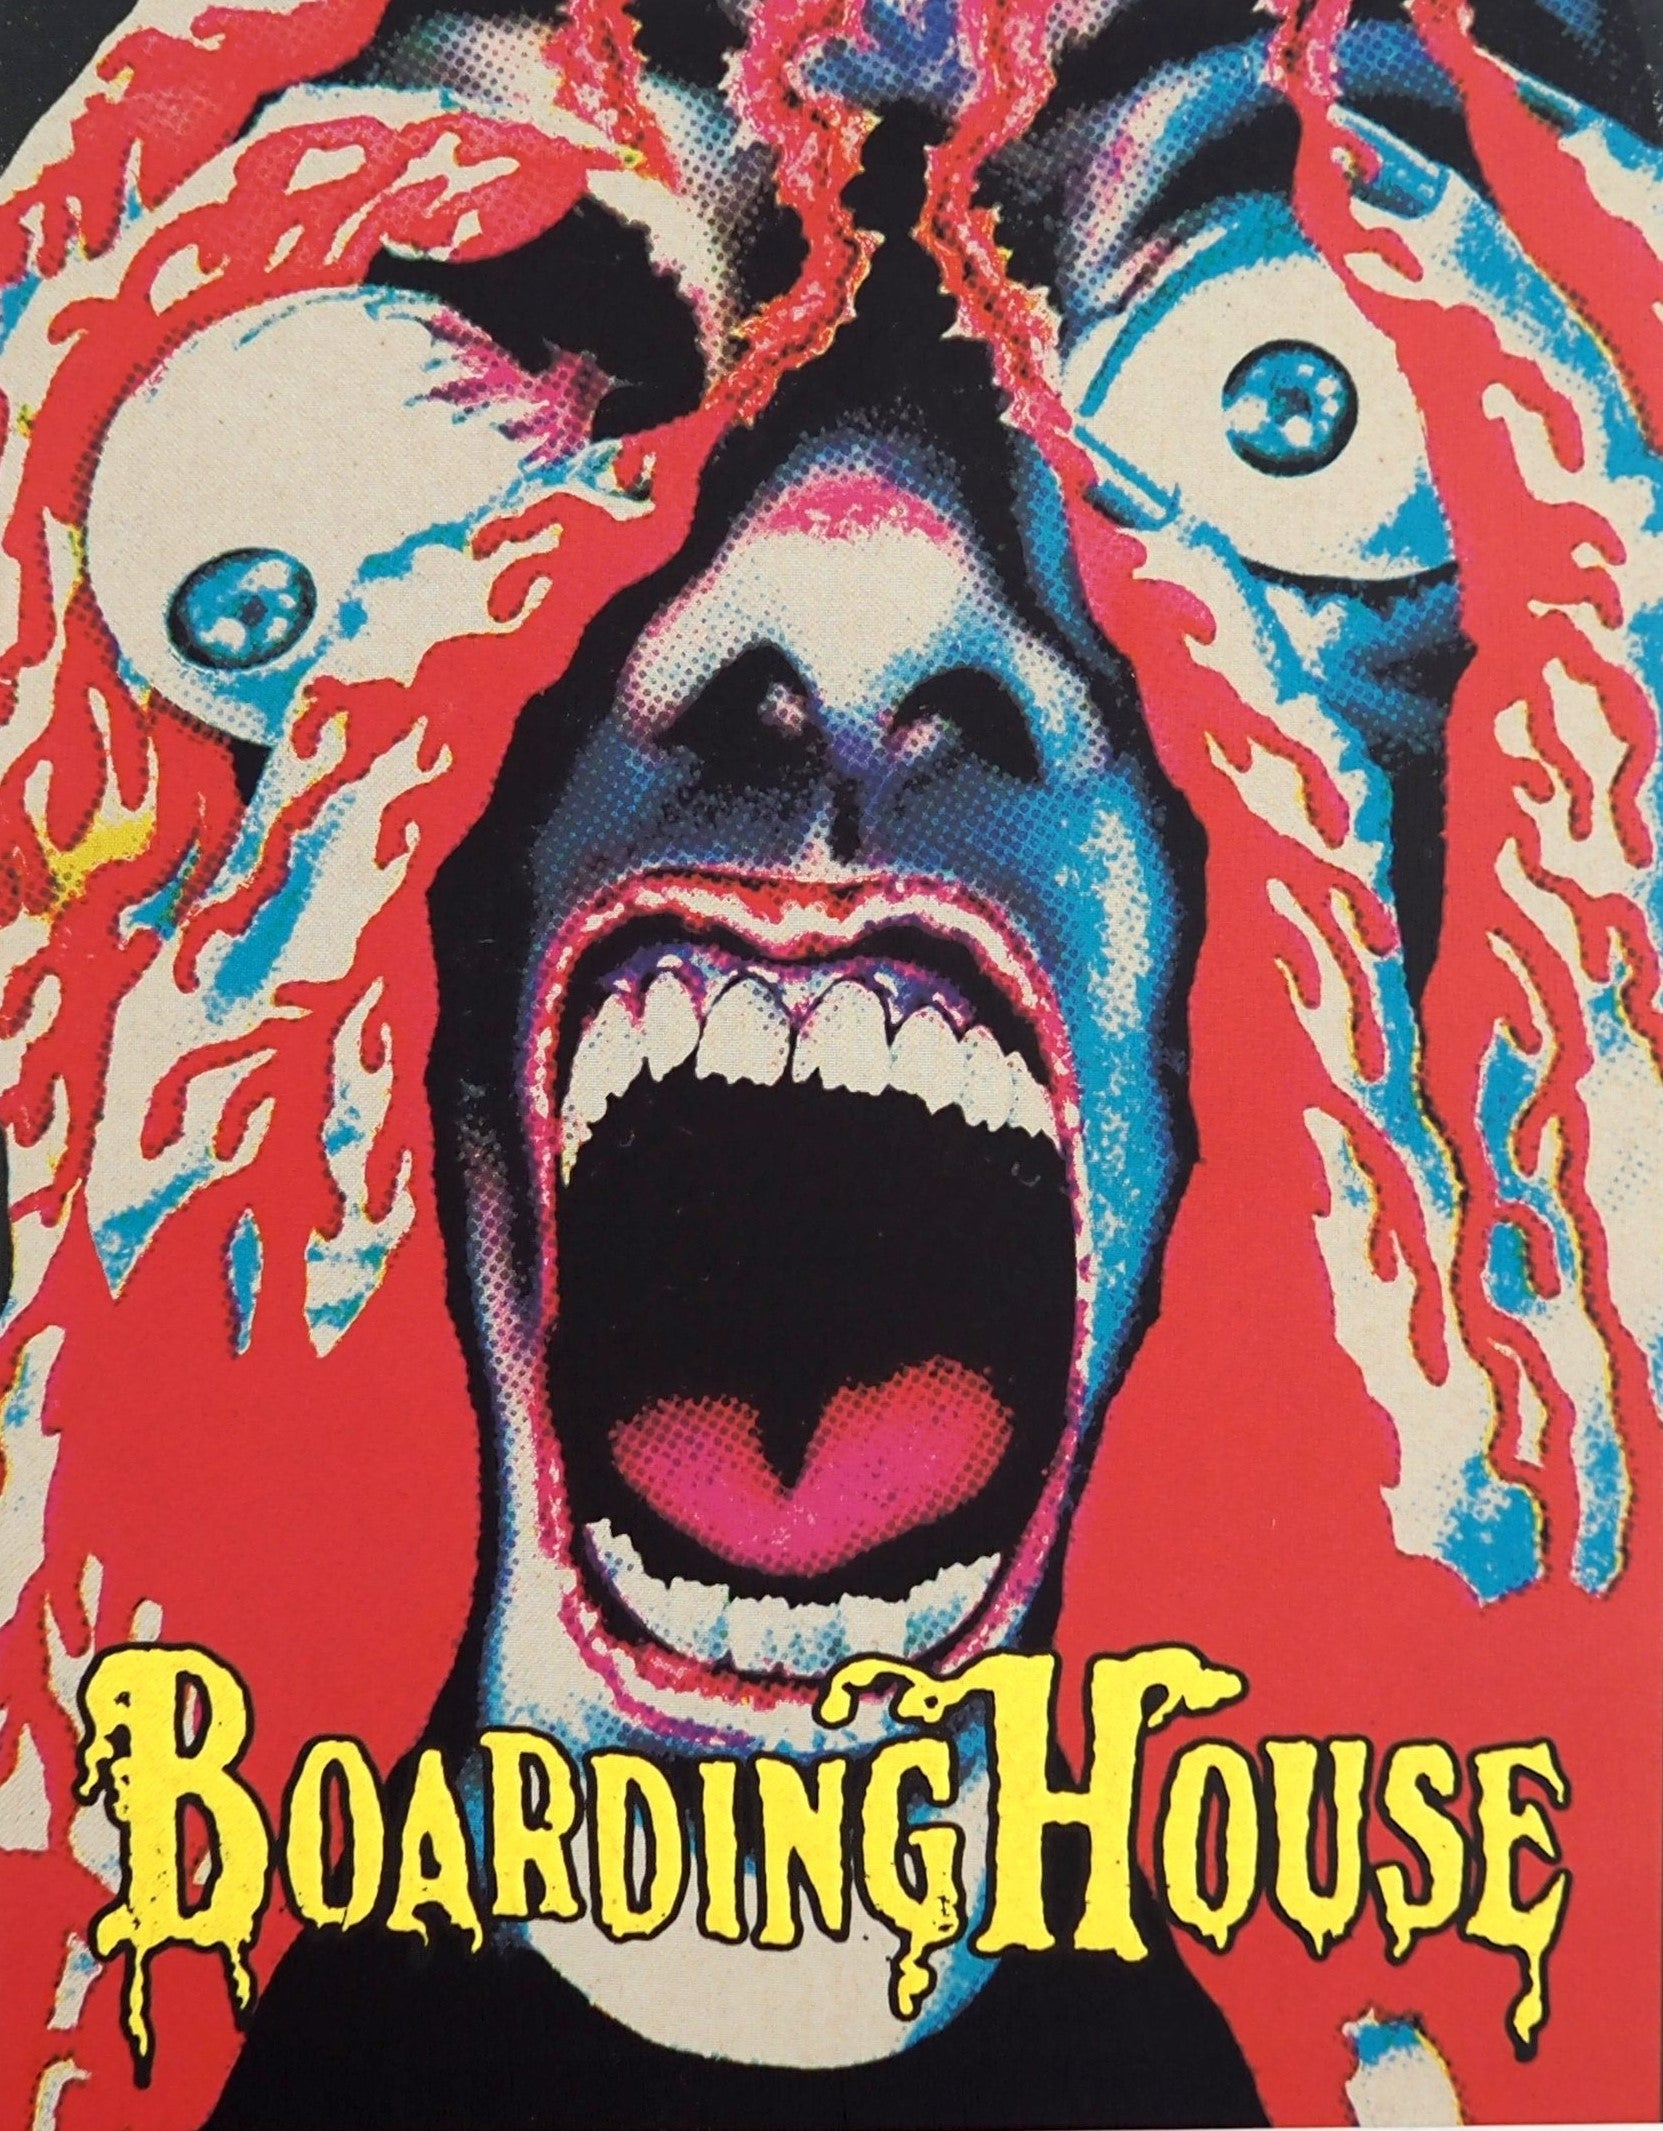 BOARDINGHOUSE (LIMITED EDITION) BLU-RAY